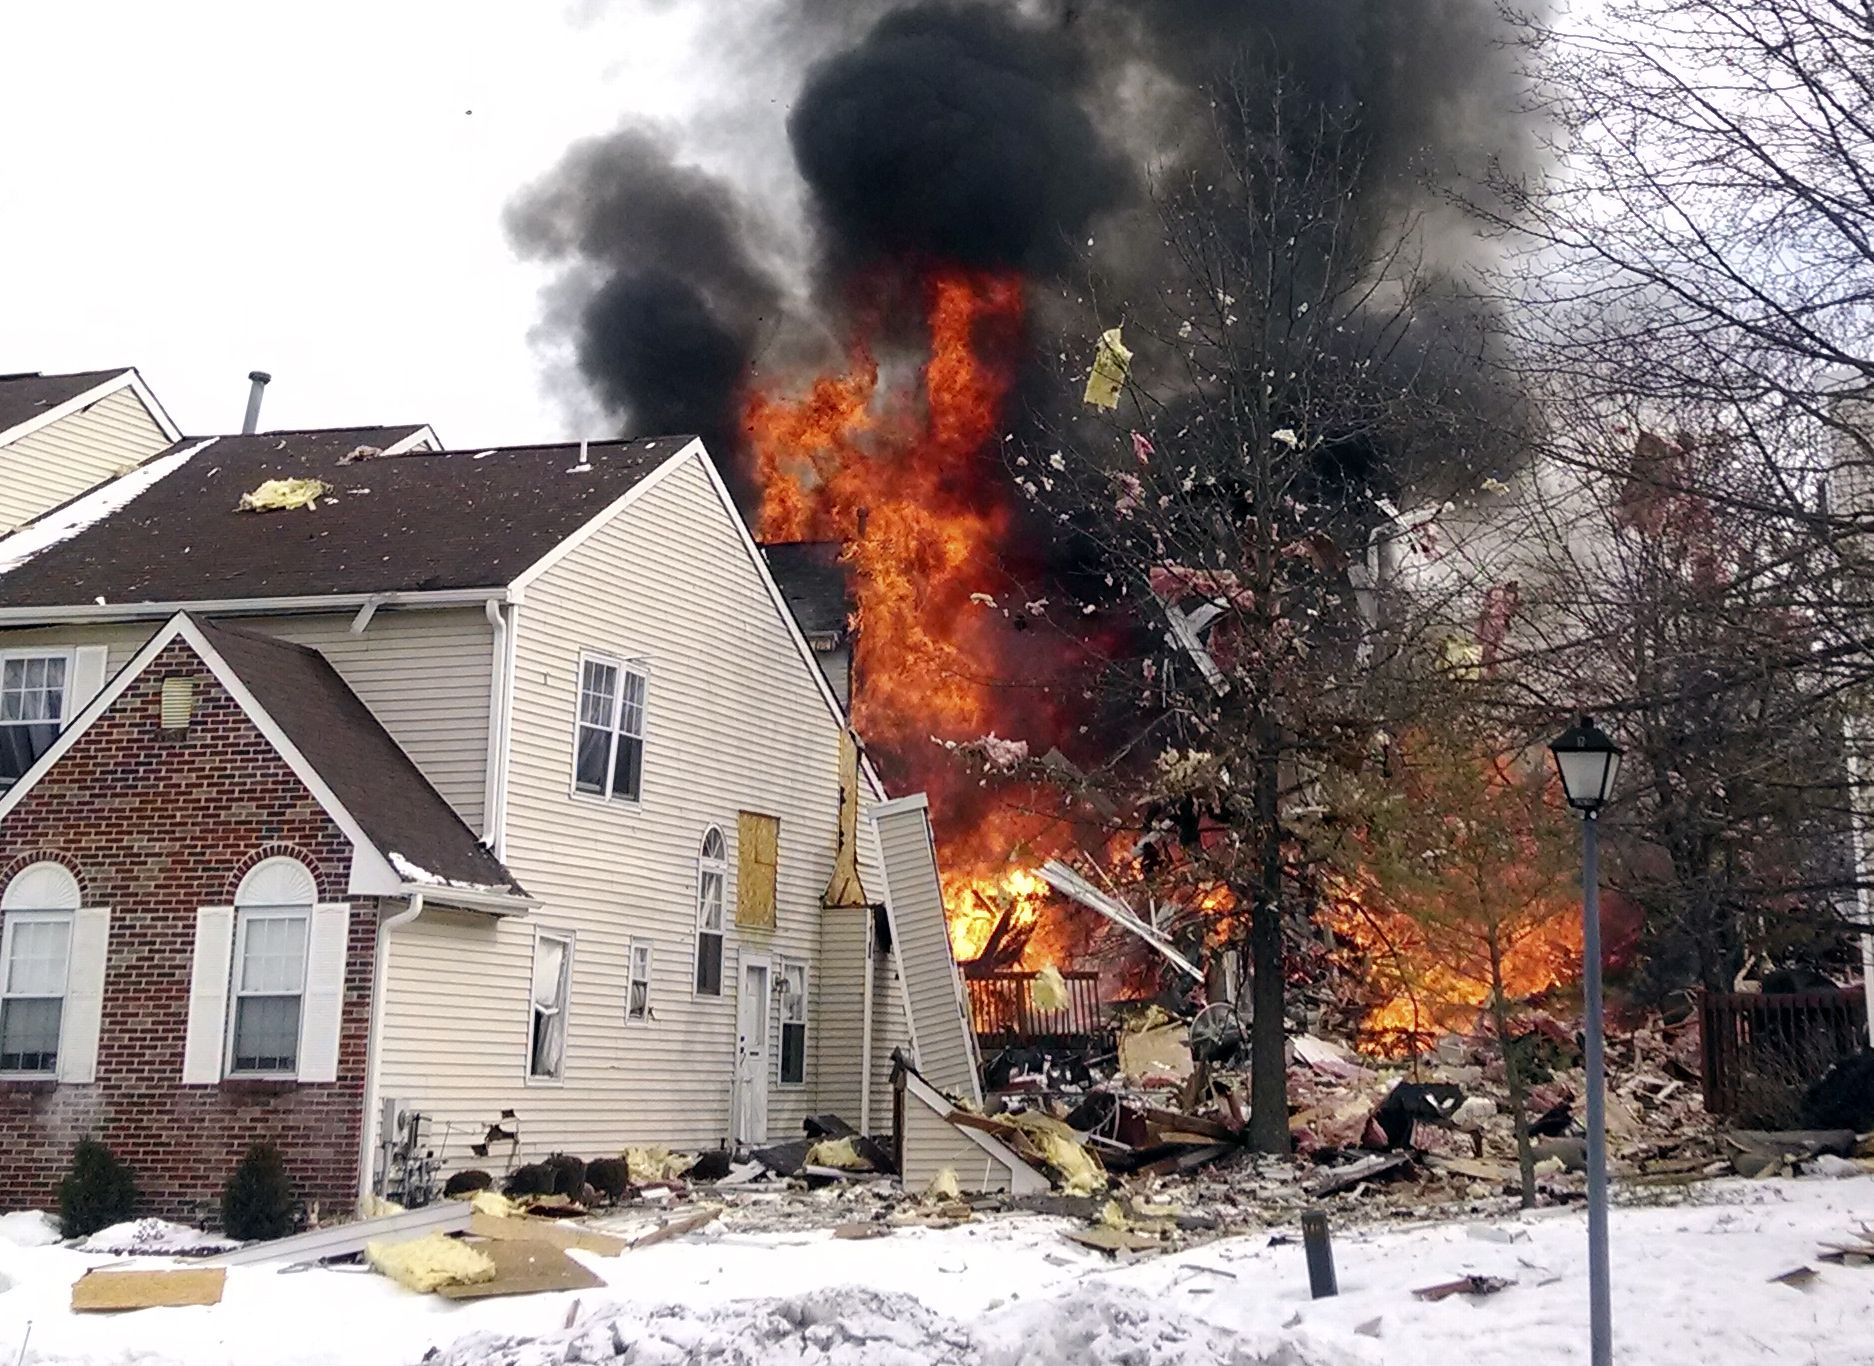 Flames and smoke are visible after an explosion at a townhouse complex Tuesday in Ewing, N.J.